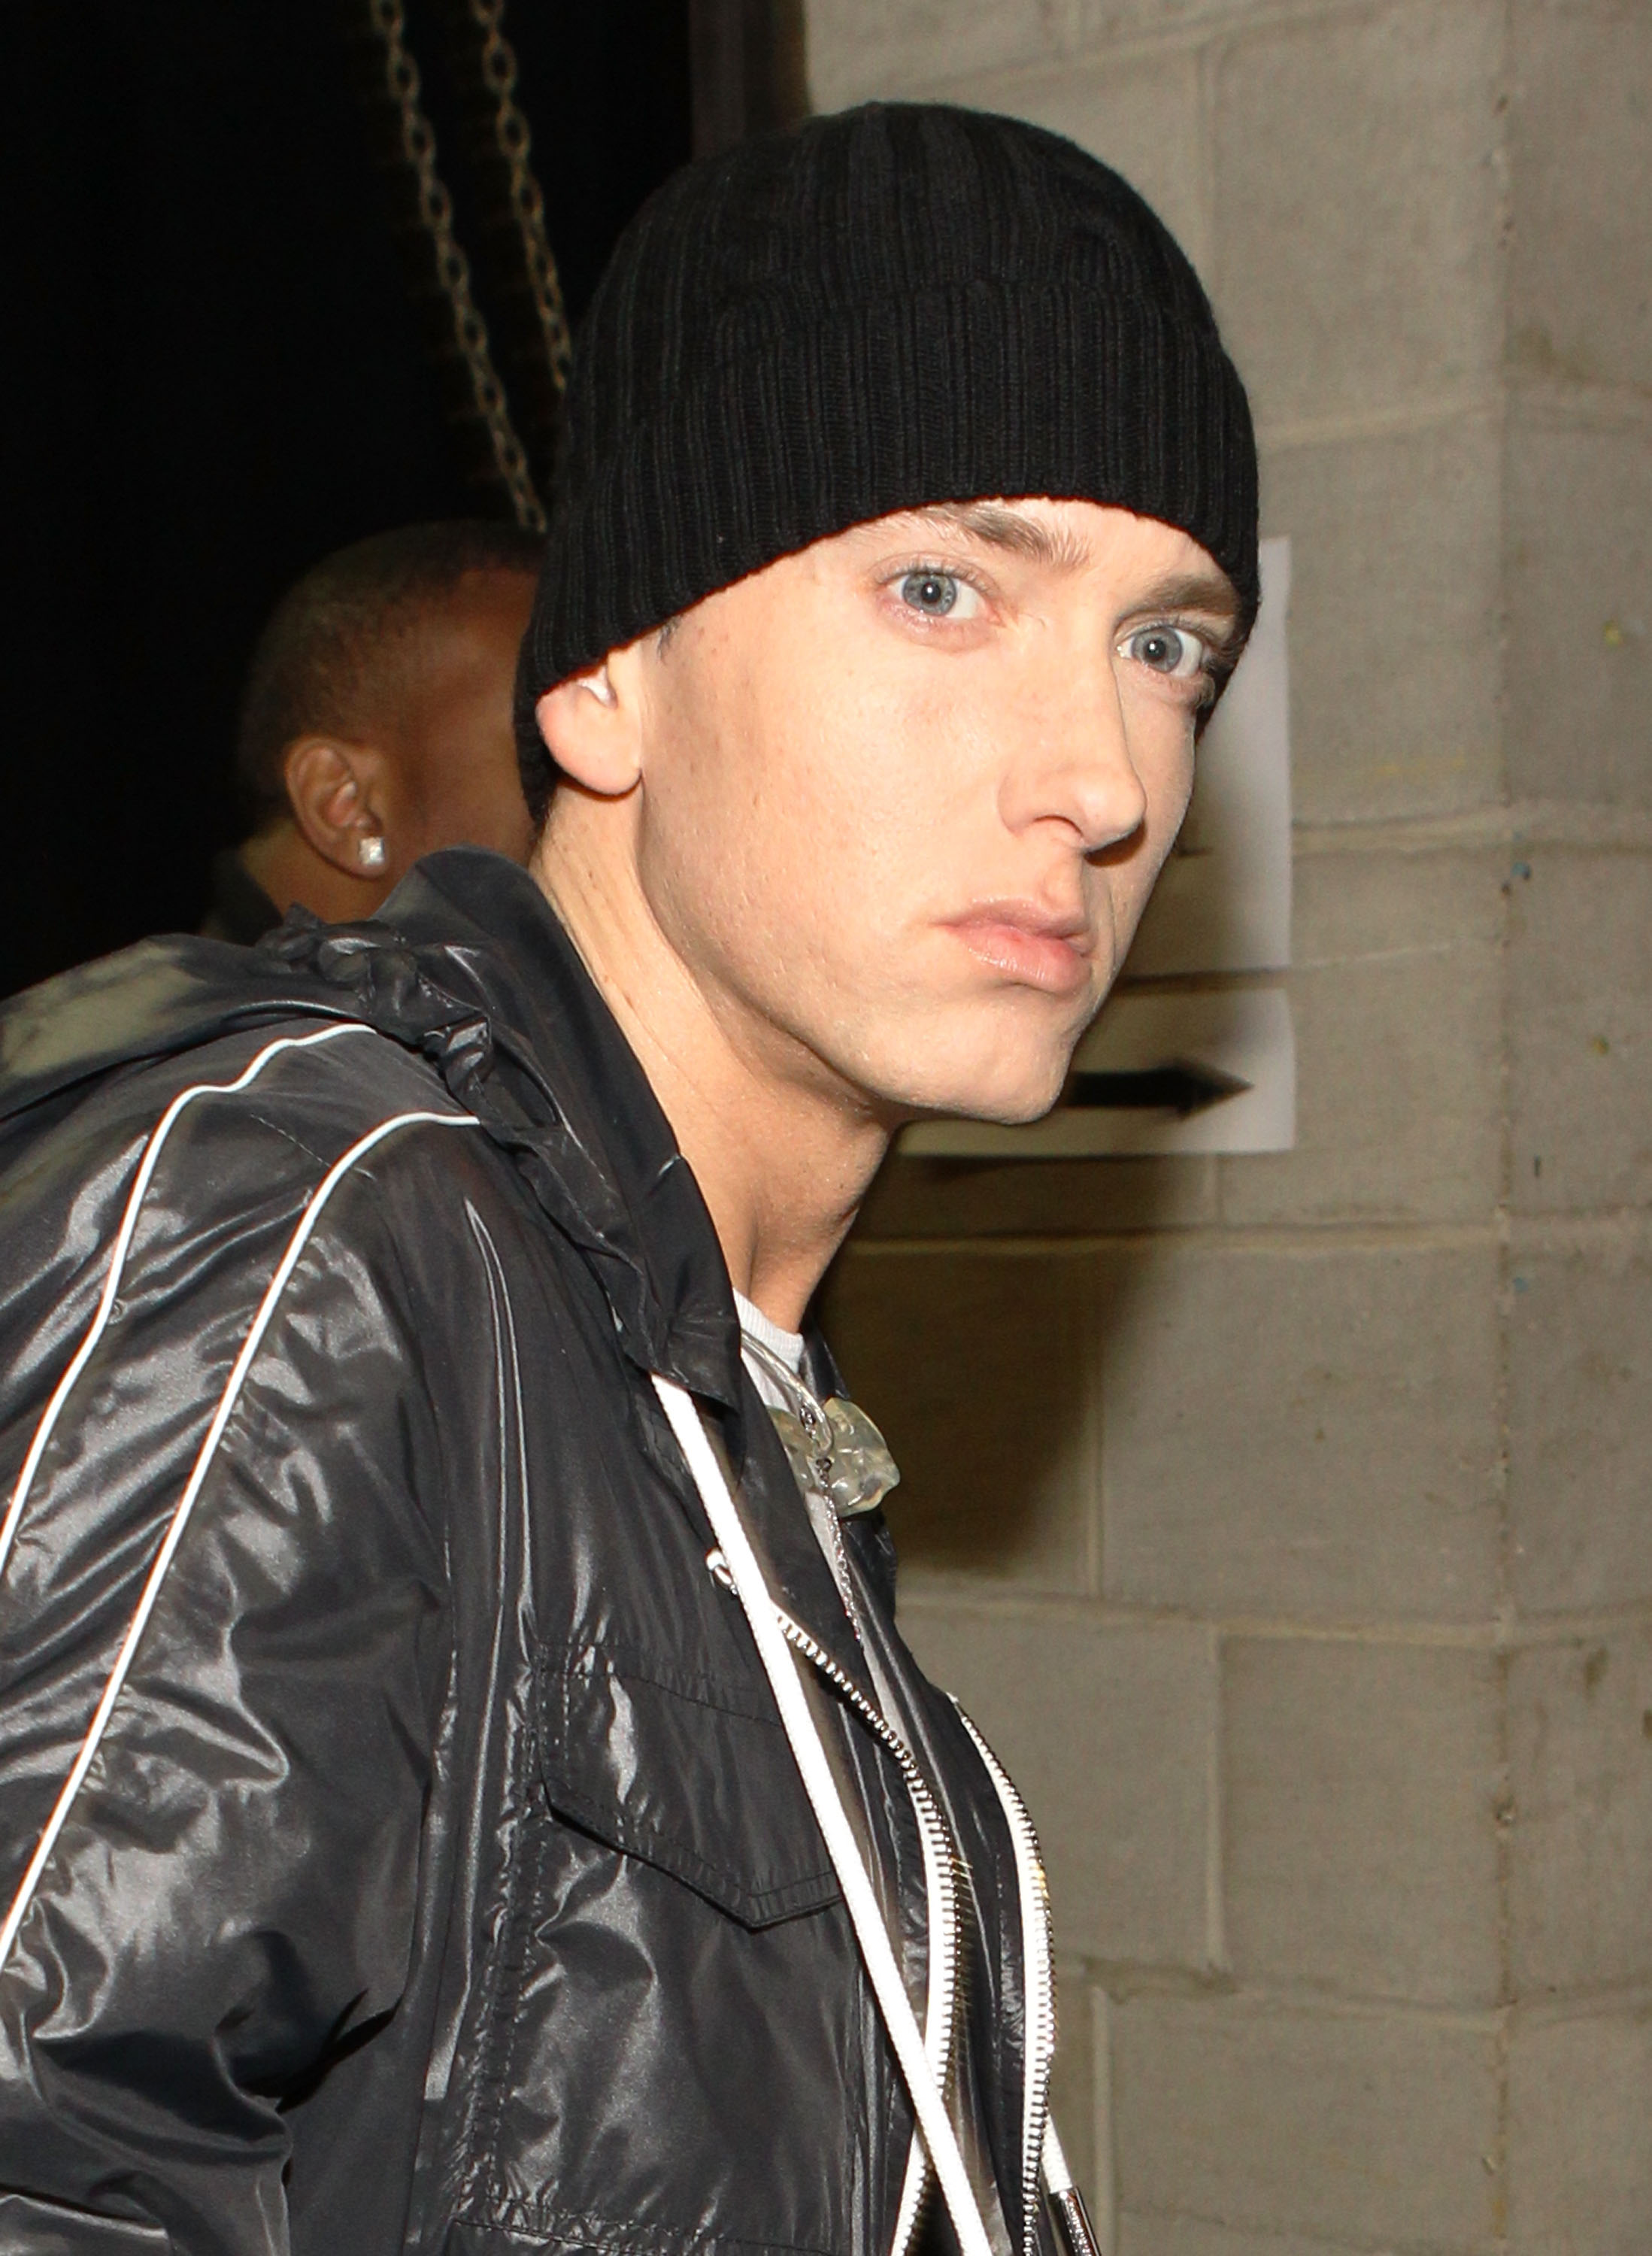 Eminem during the 52nd Annual Grammy Awards on January 31, 2010 in Los Angeles, California | Source: Getty Images